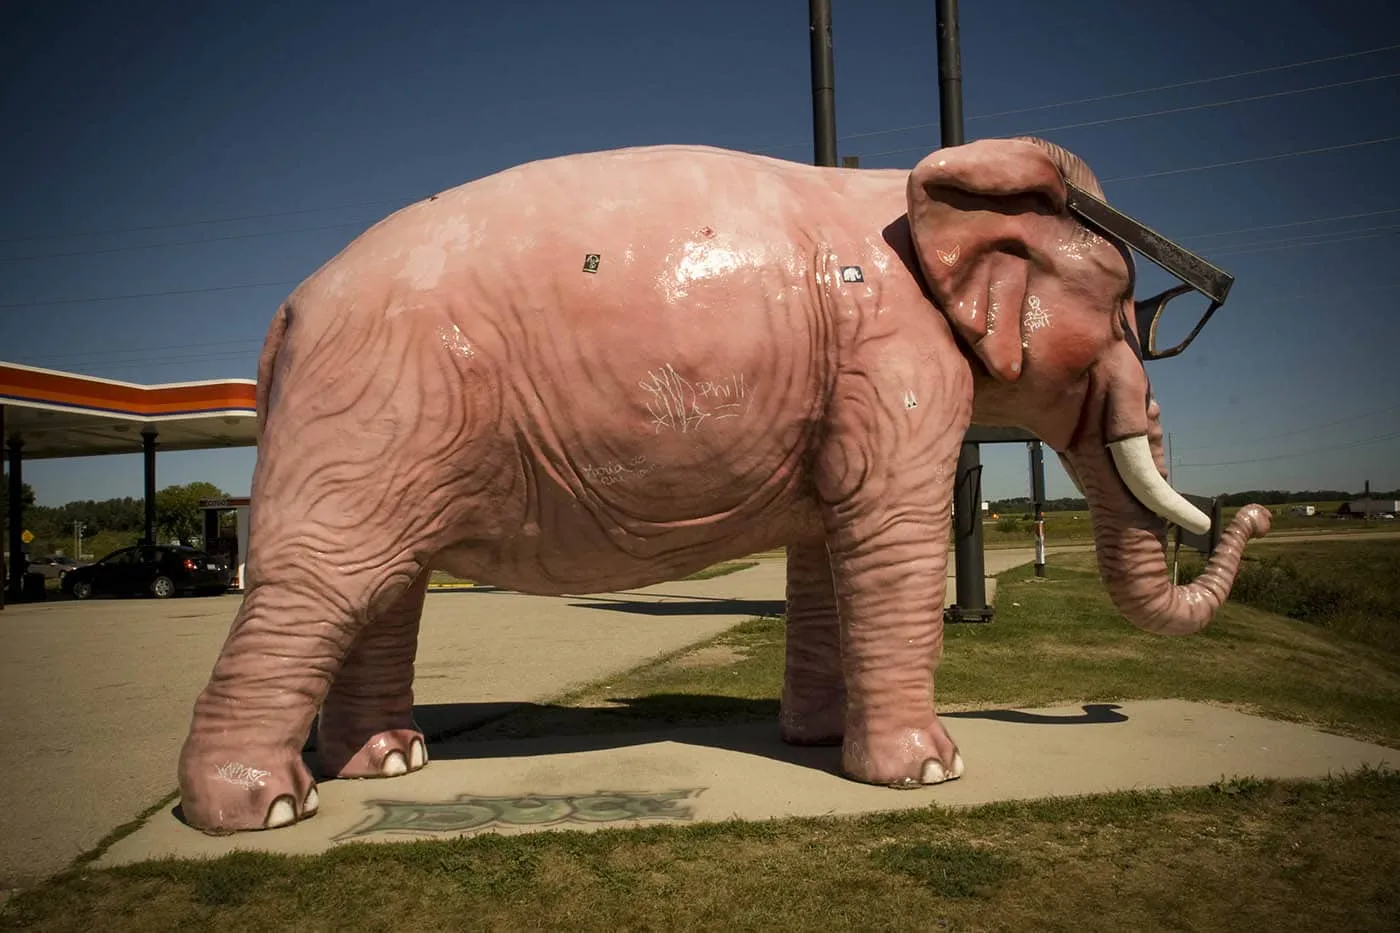 Pink Elephant with Glasses - a roadside attraction in DeForest, Wisconsin